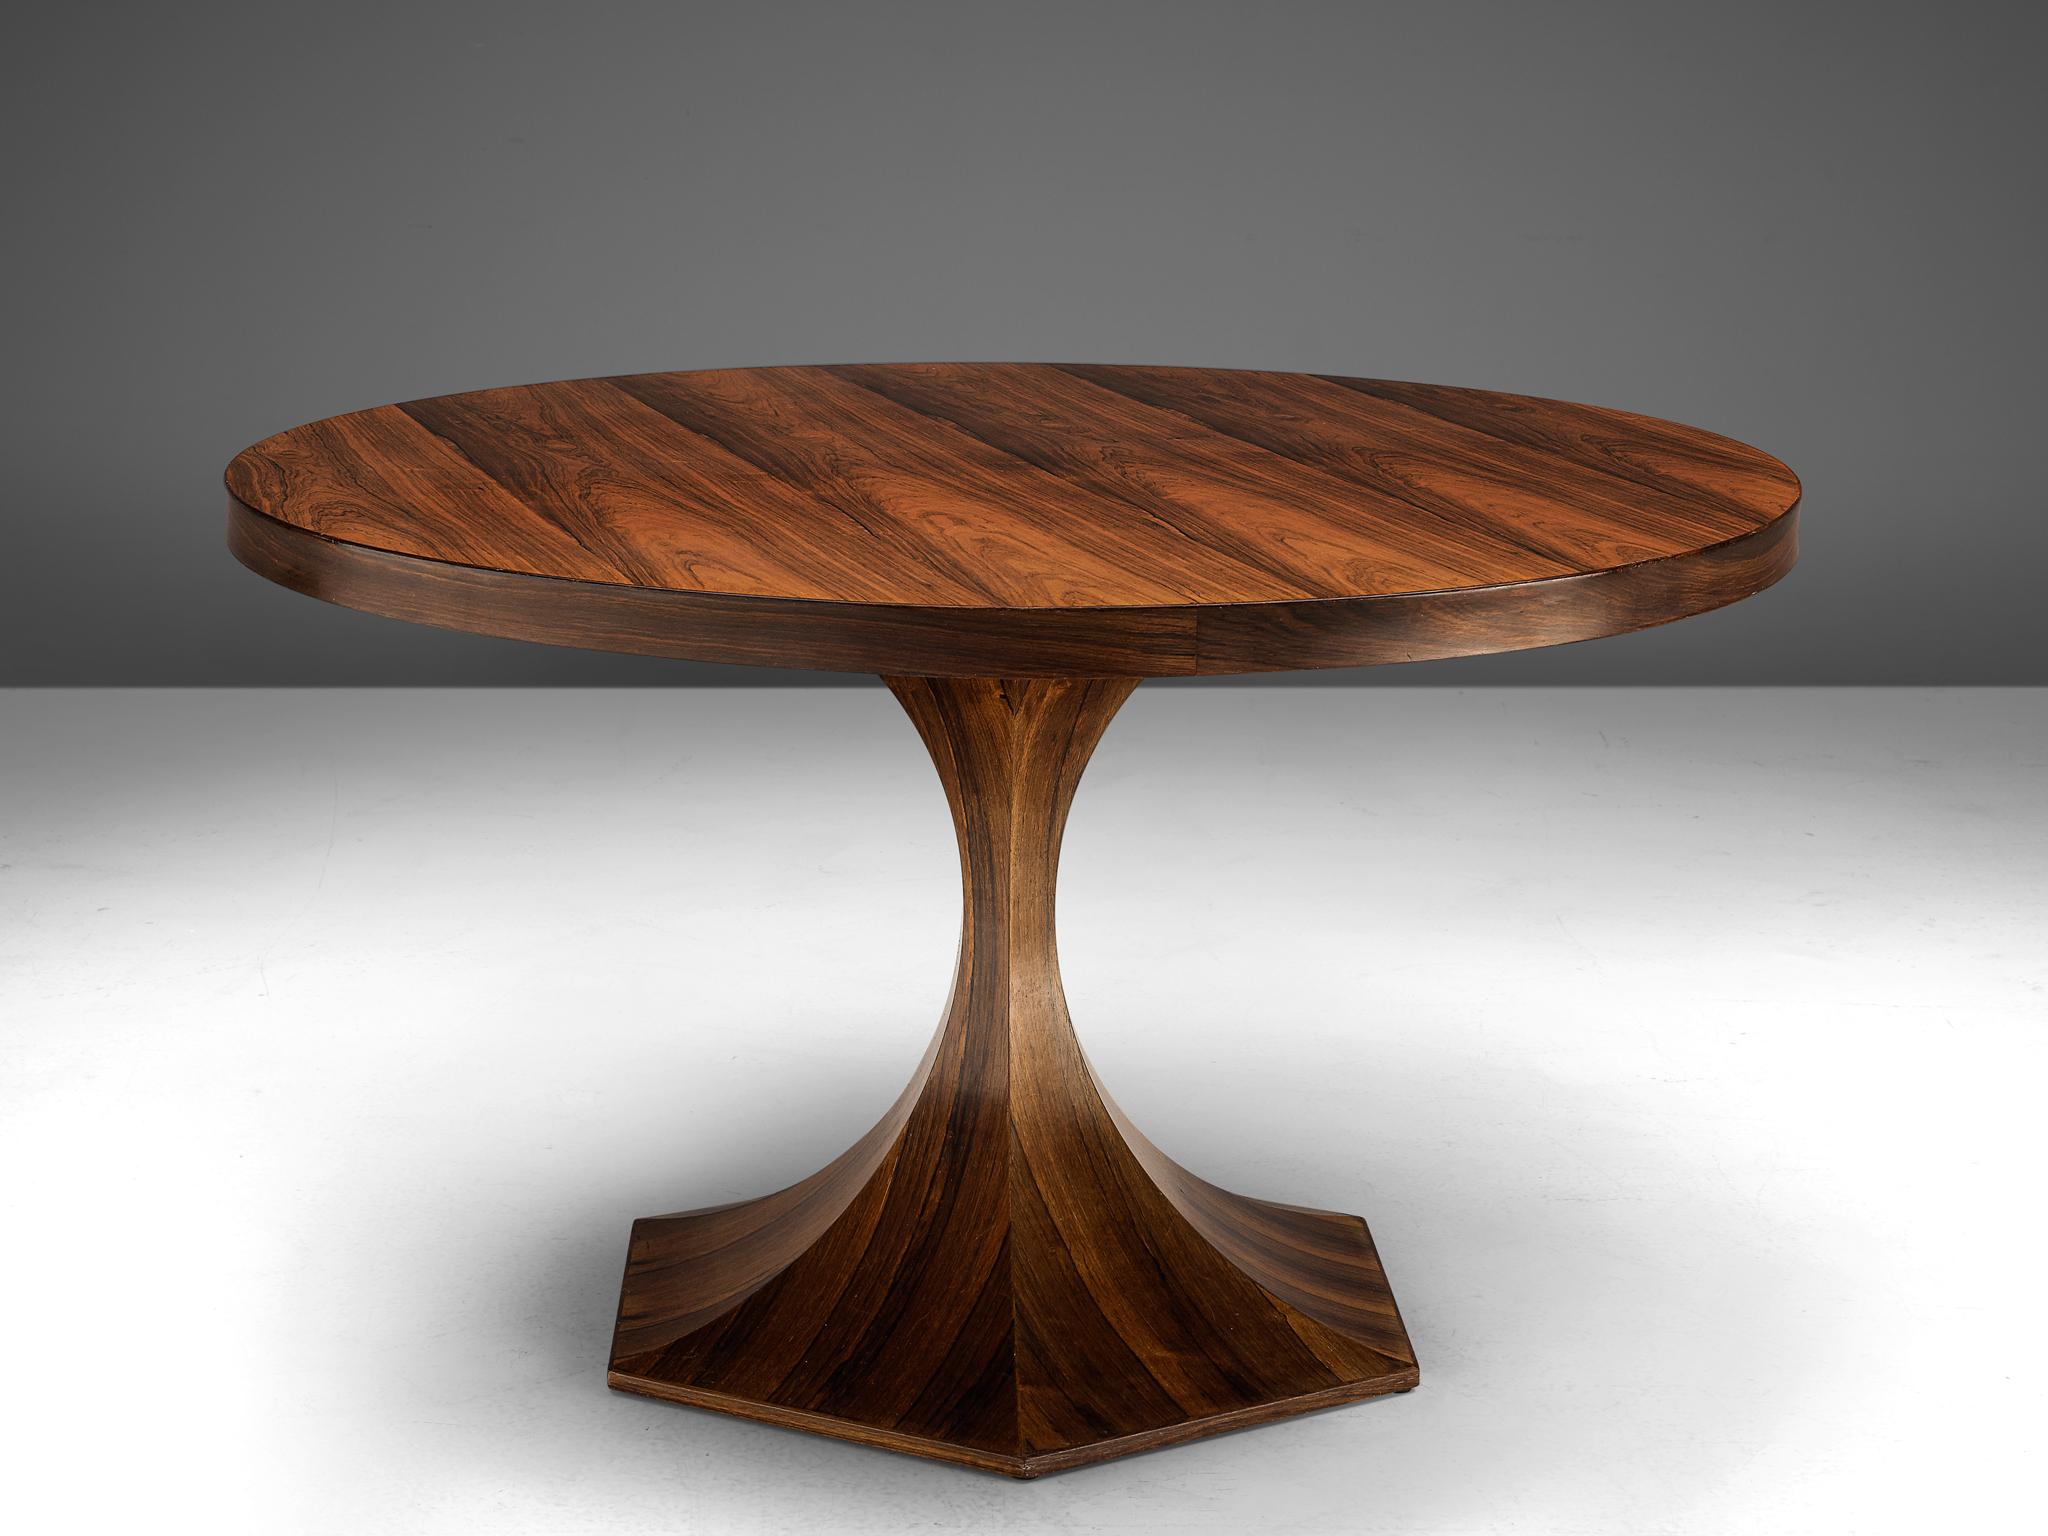 Carlo de Carli, round dining table, rosewood, Italy, circa 1950.

This circular table by Carlo de Carli features a slim, sculptural foot. The wooden grain has an admirable expression with dark grains that defines the aesthetics of this table. The